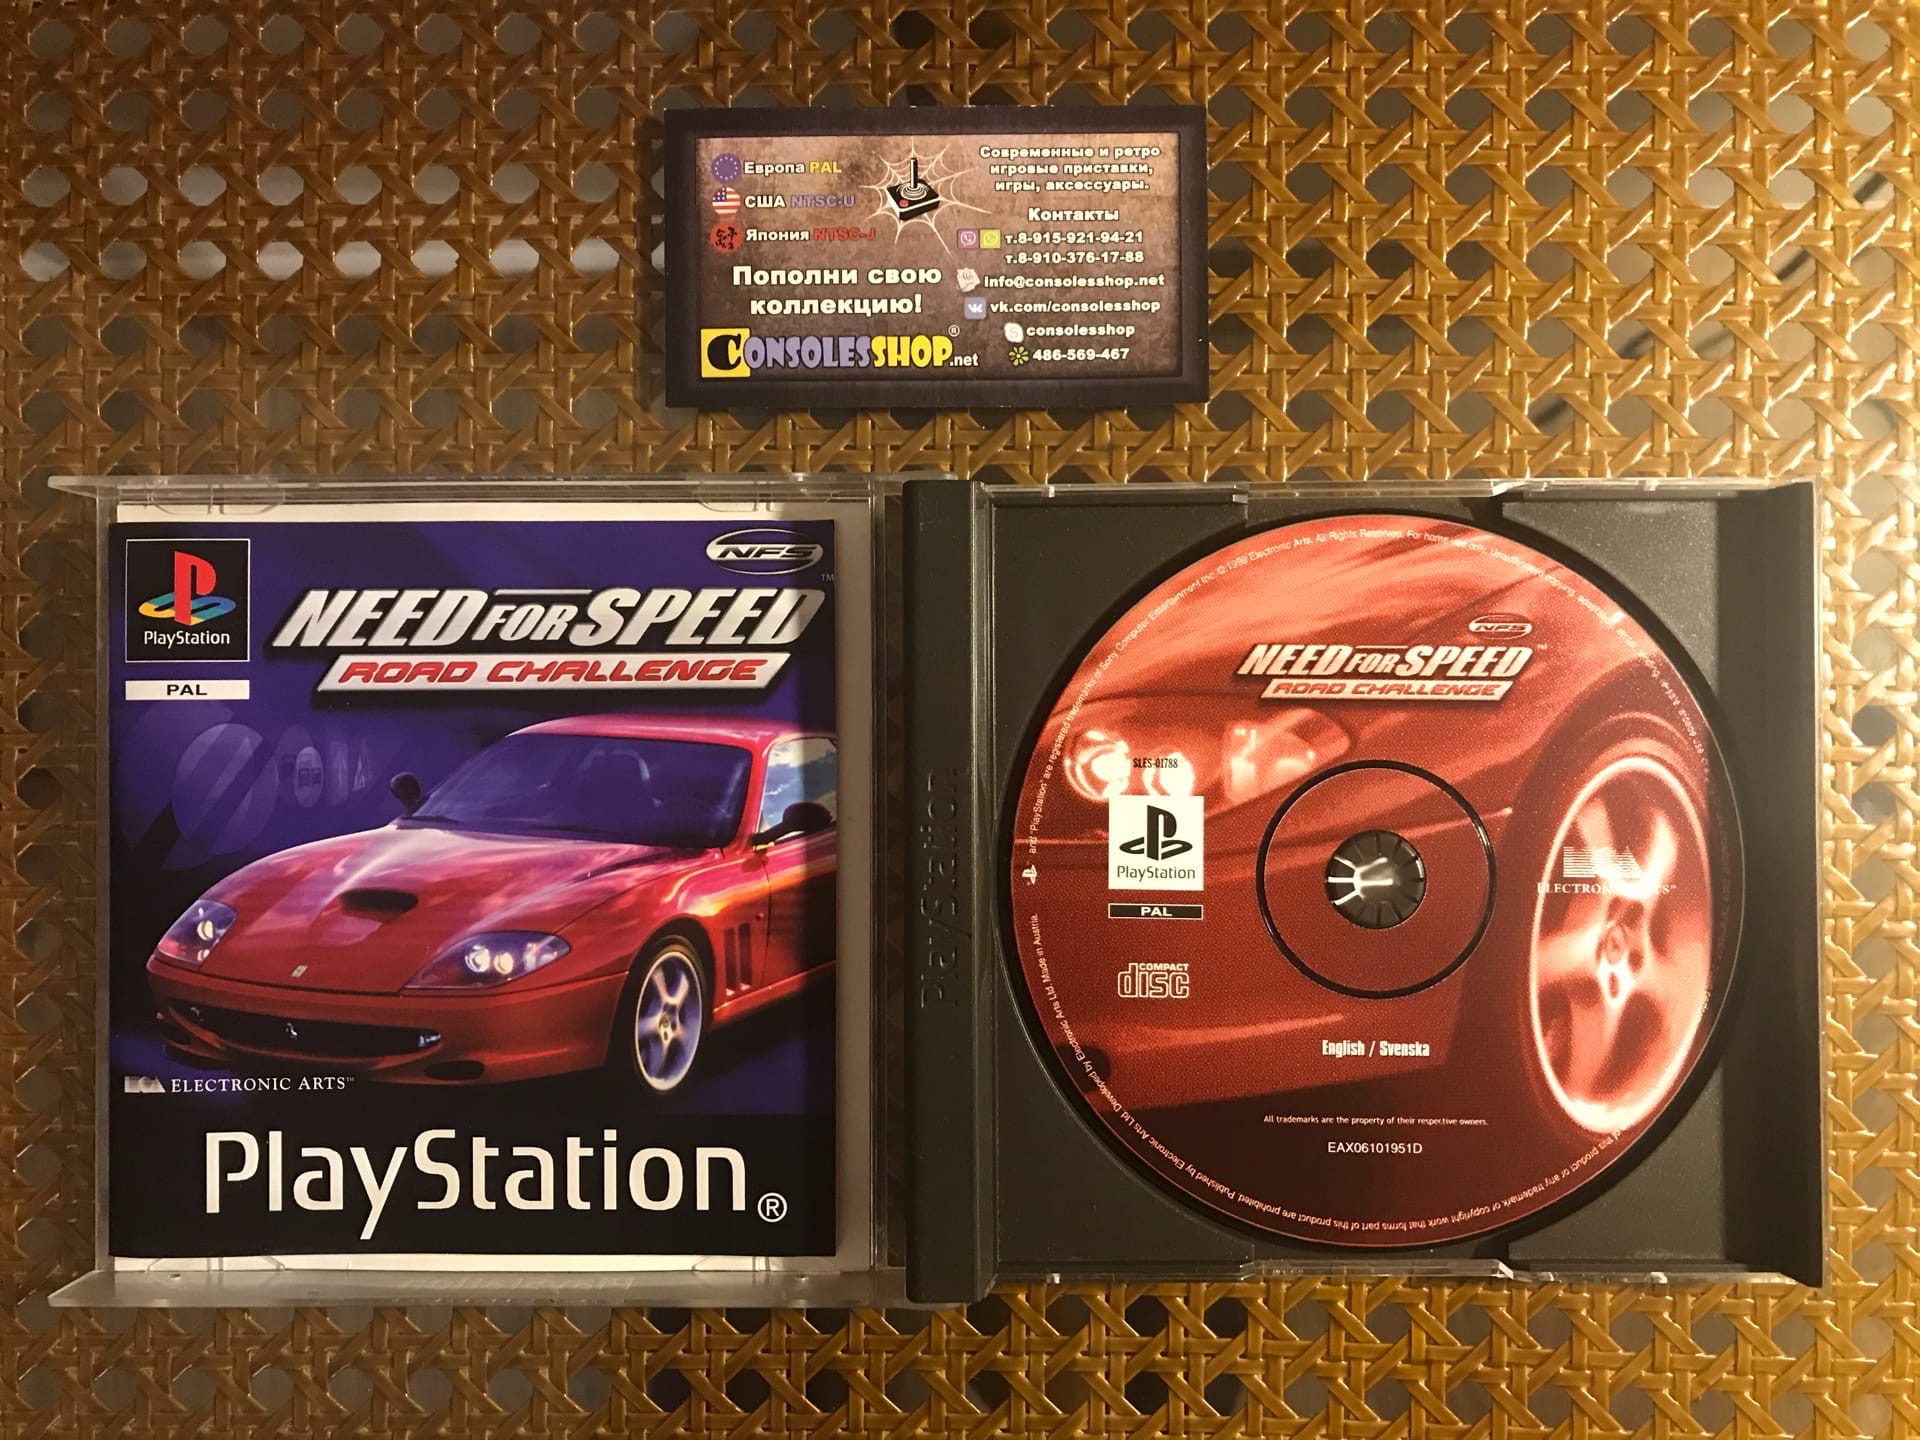 NEED FOR SPEED ROAD CHALLENGE PS1